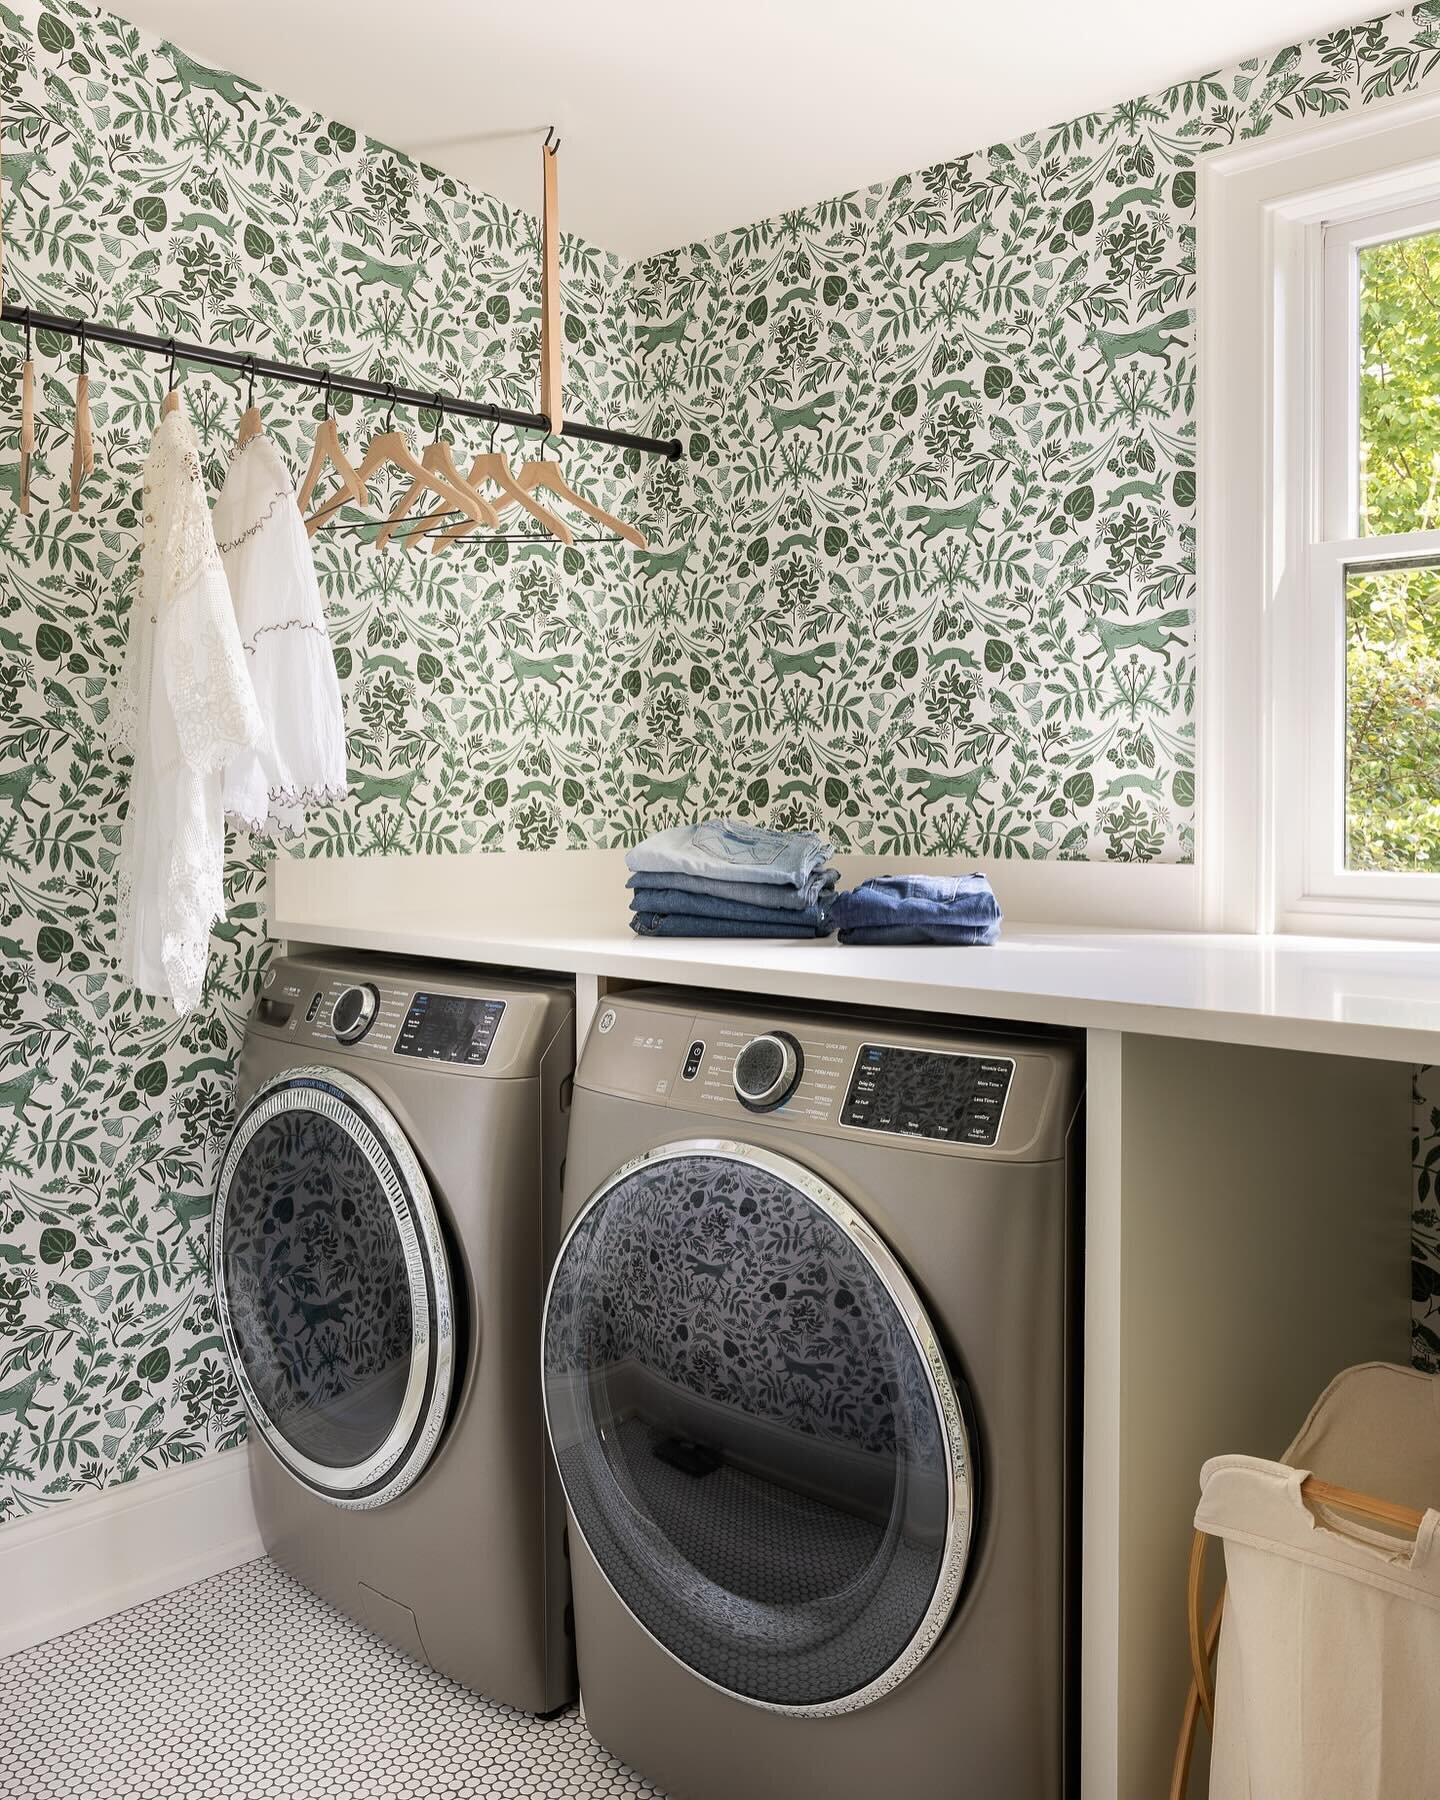 Happy Monday
#hyggehygge 
#wallpaperdesign 
#laundryroom 
#easyliving 
#greendesign 
#psanddaughters